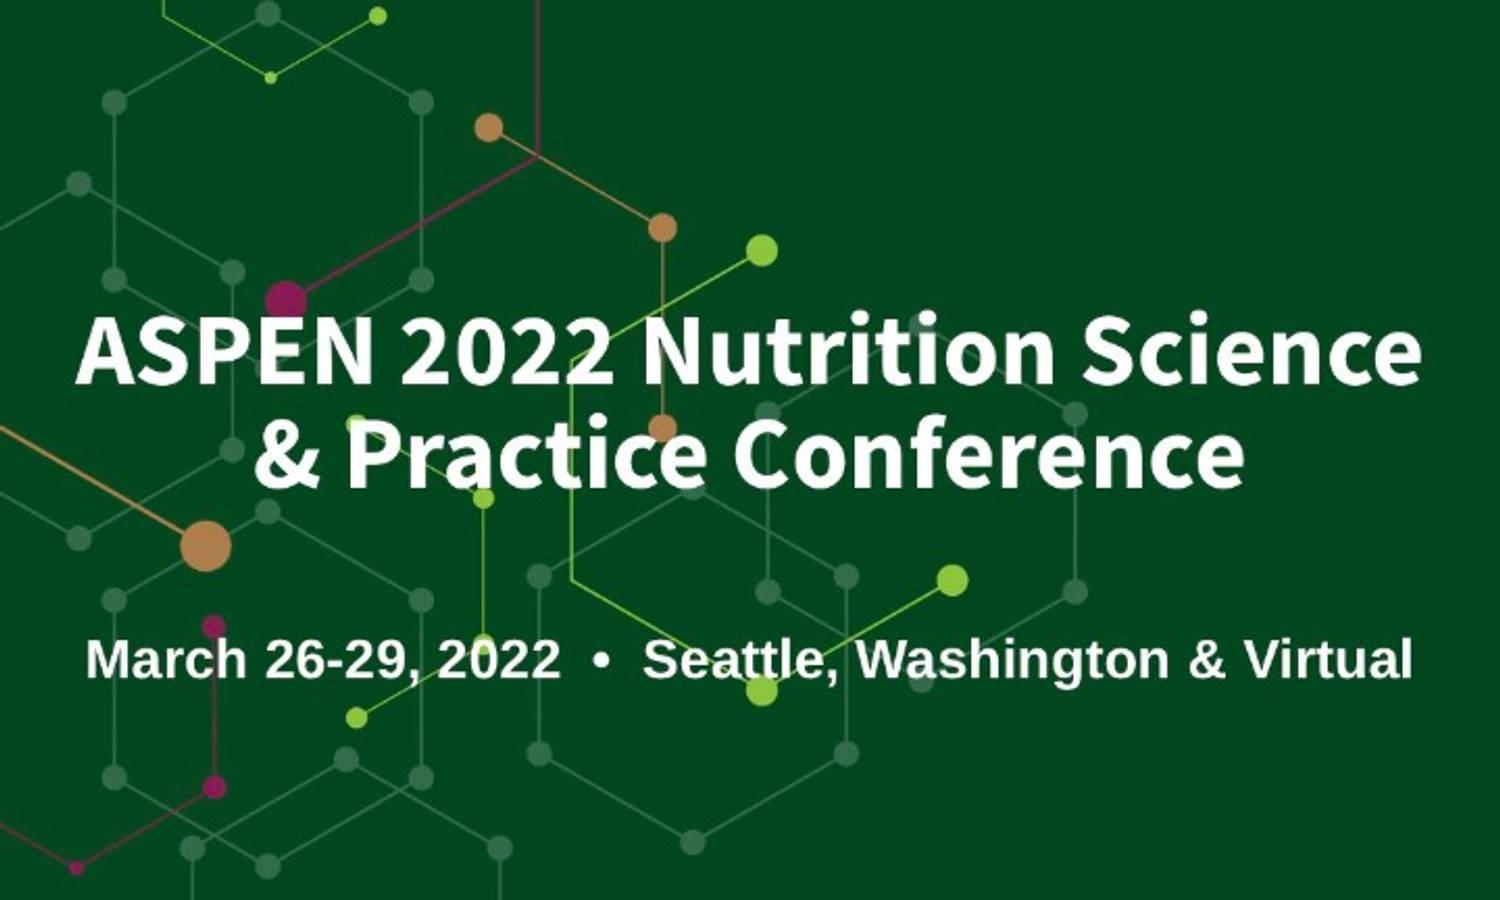 ASPEN 2022 Nutrition Science & Practice Conference